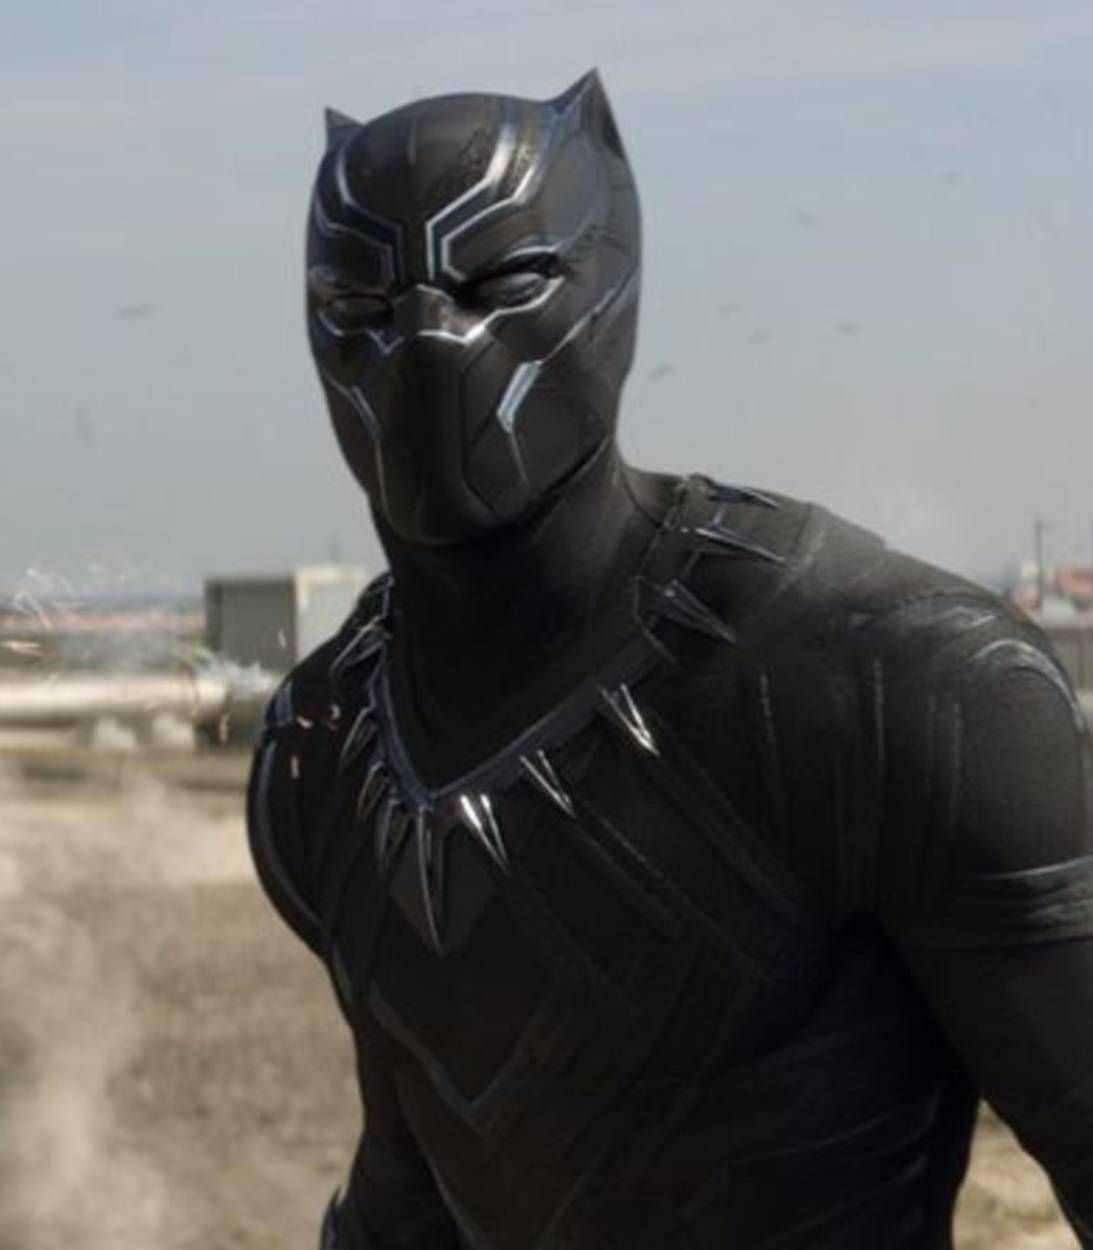 Black Panther from Captain America Civil War pic vertical